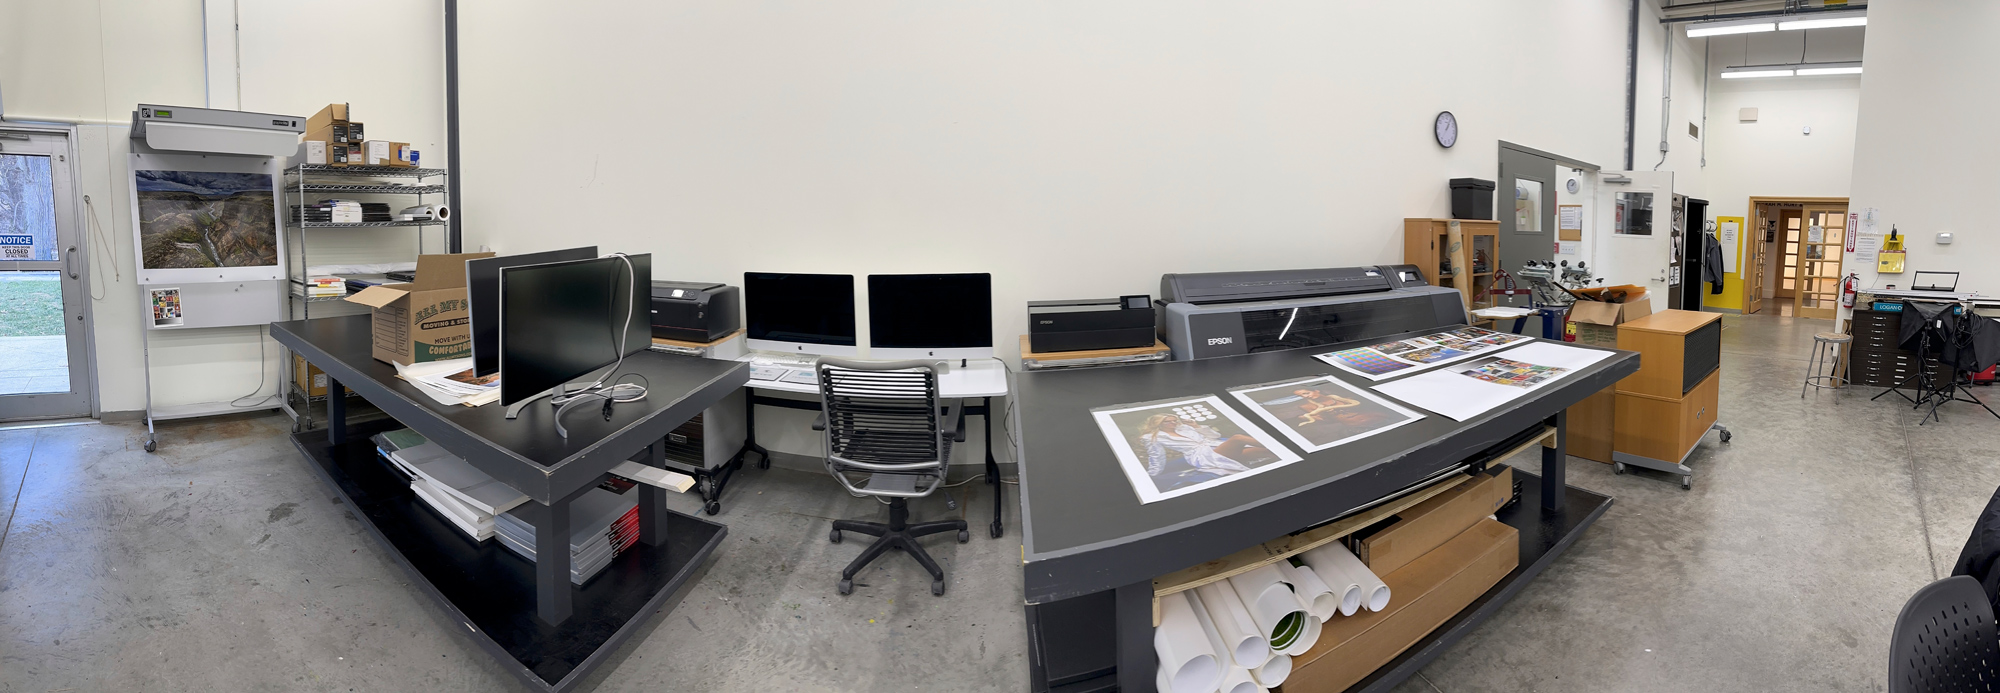 A Pano showing my printers at our new space. Lots of work to still do but we are printing.